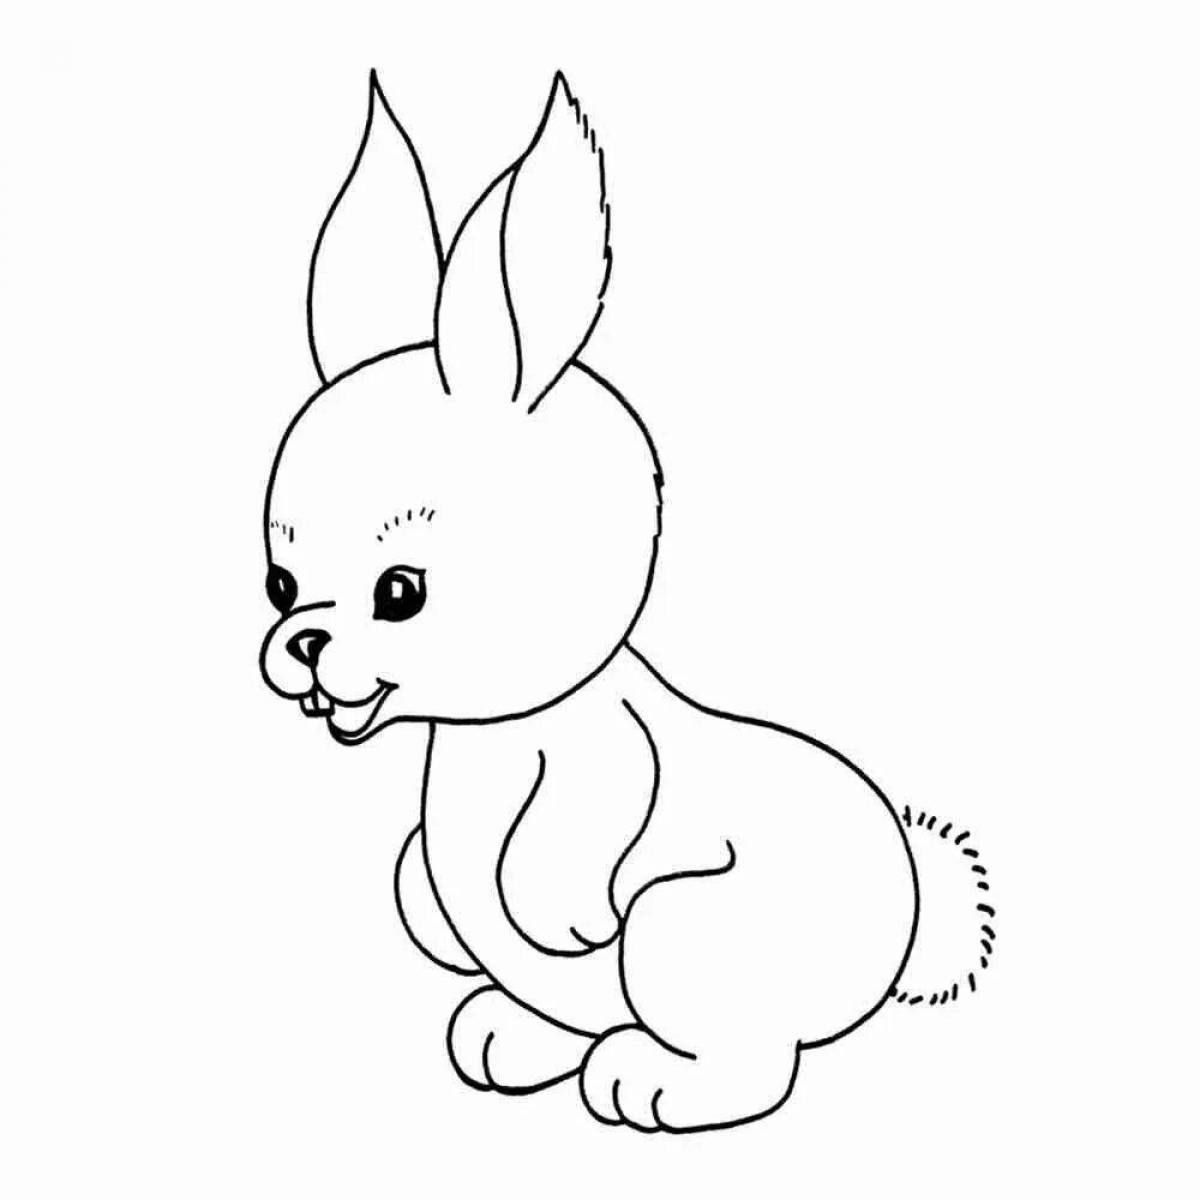 Colourful hare coloring book for kids